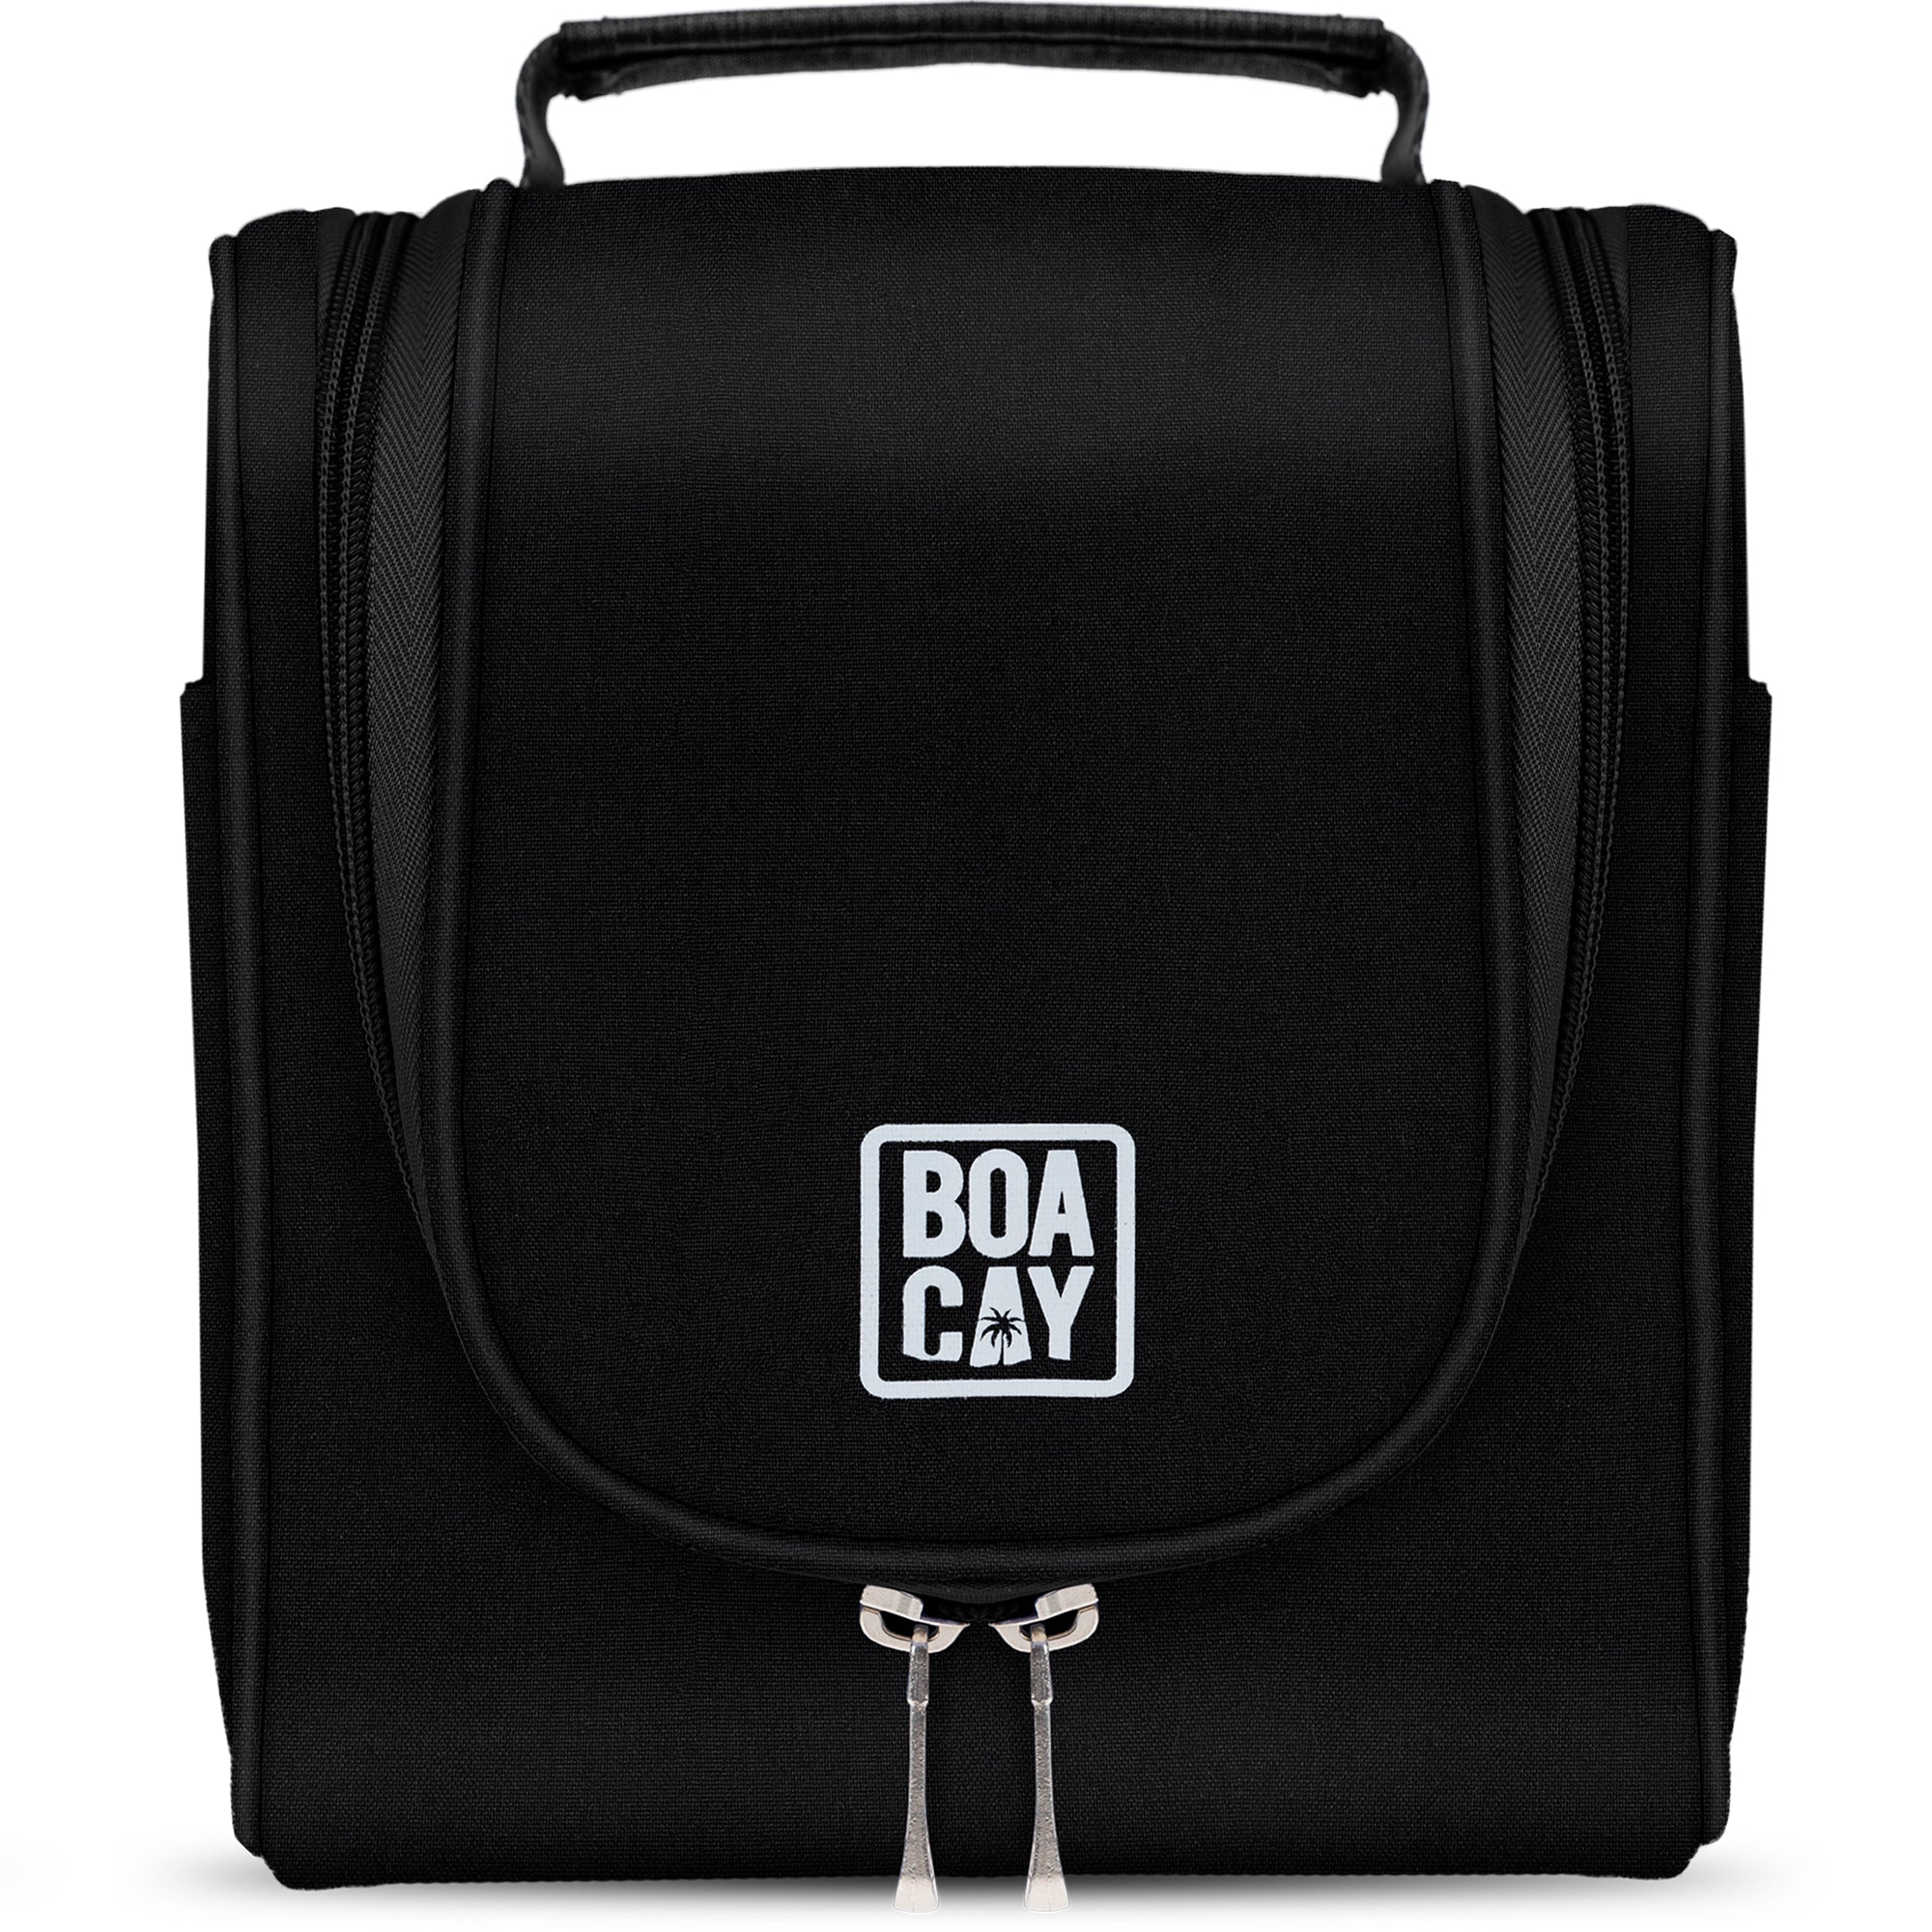 Small Black Hanging Travel Toiletry Bag for Women and Men - Boacay